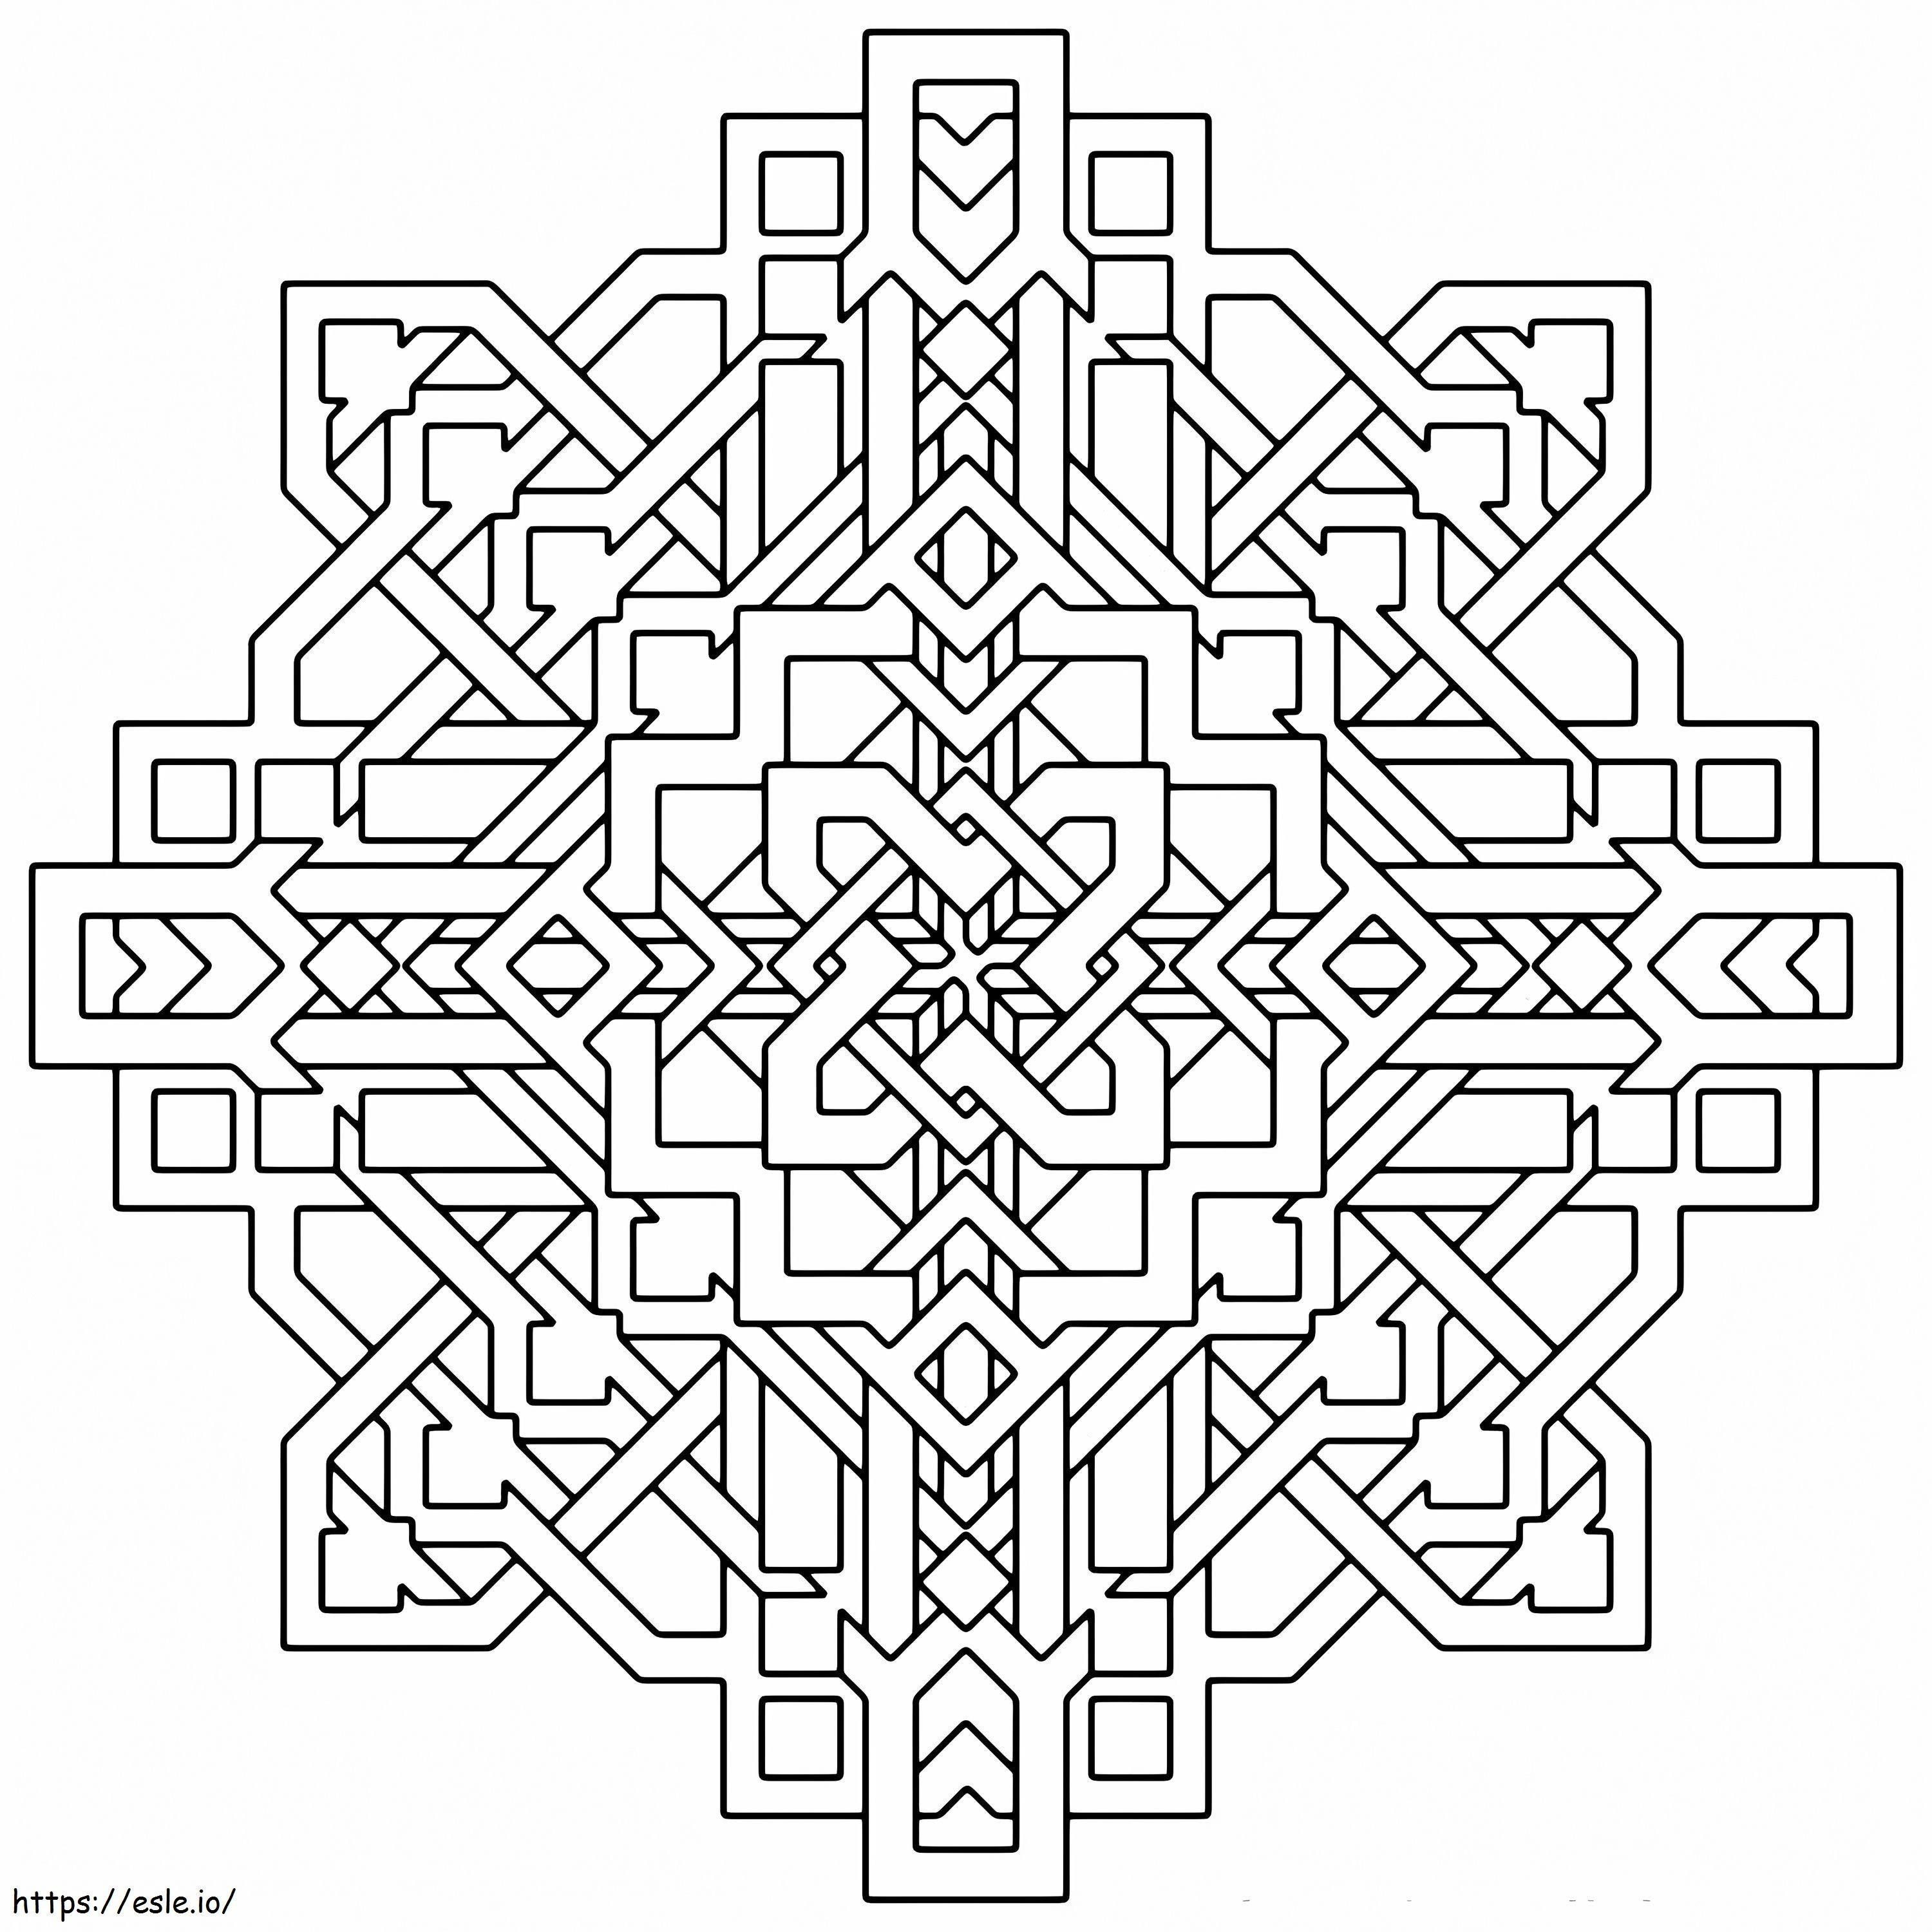 1572052494 Geometric Geometric Colouring Pages Free Printable For Adults Geometric coloring page